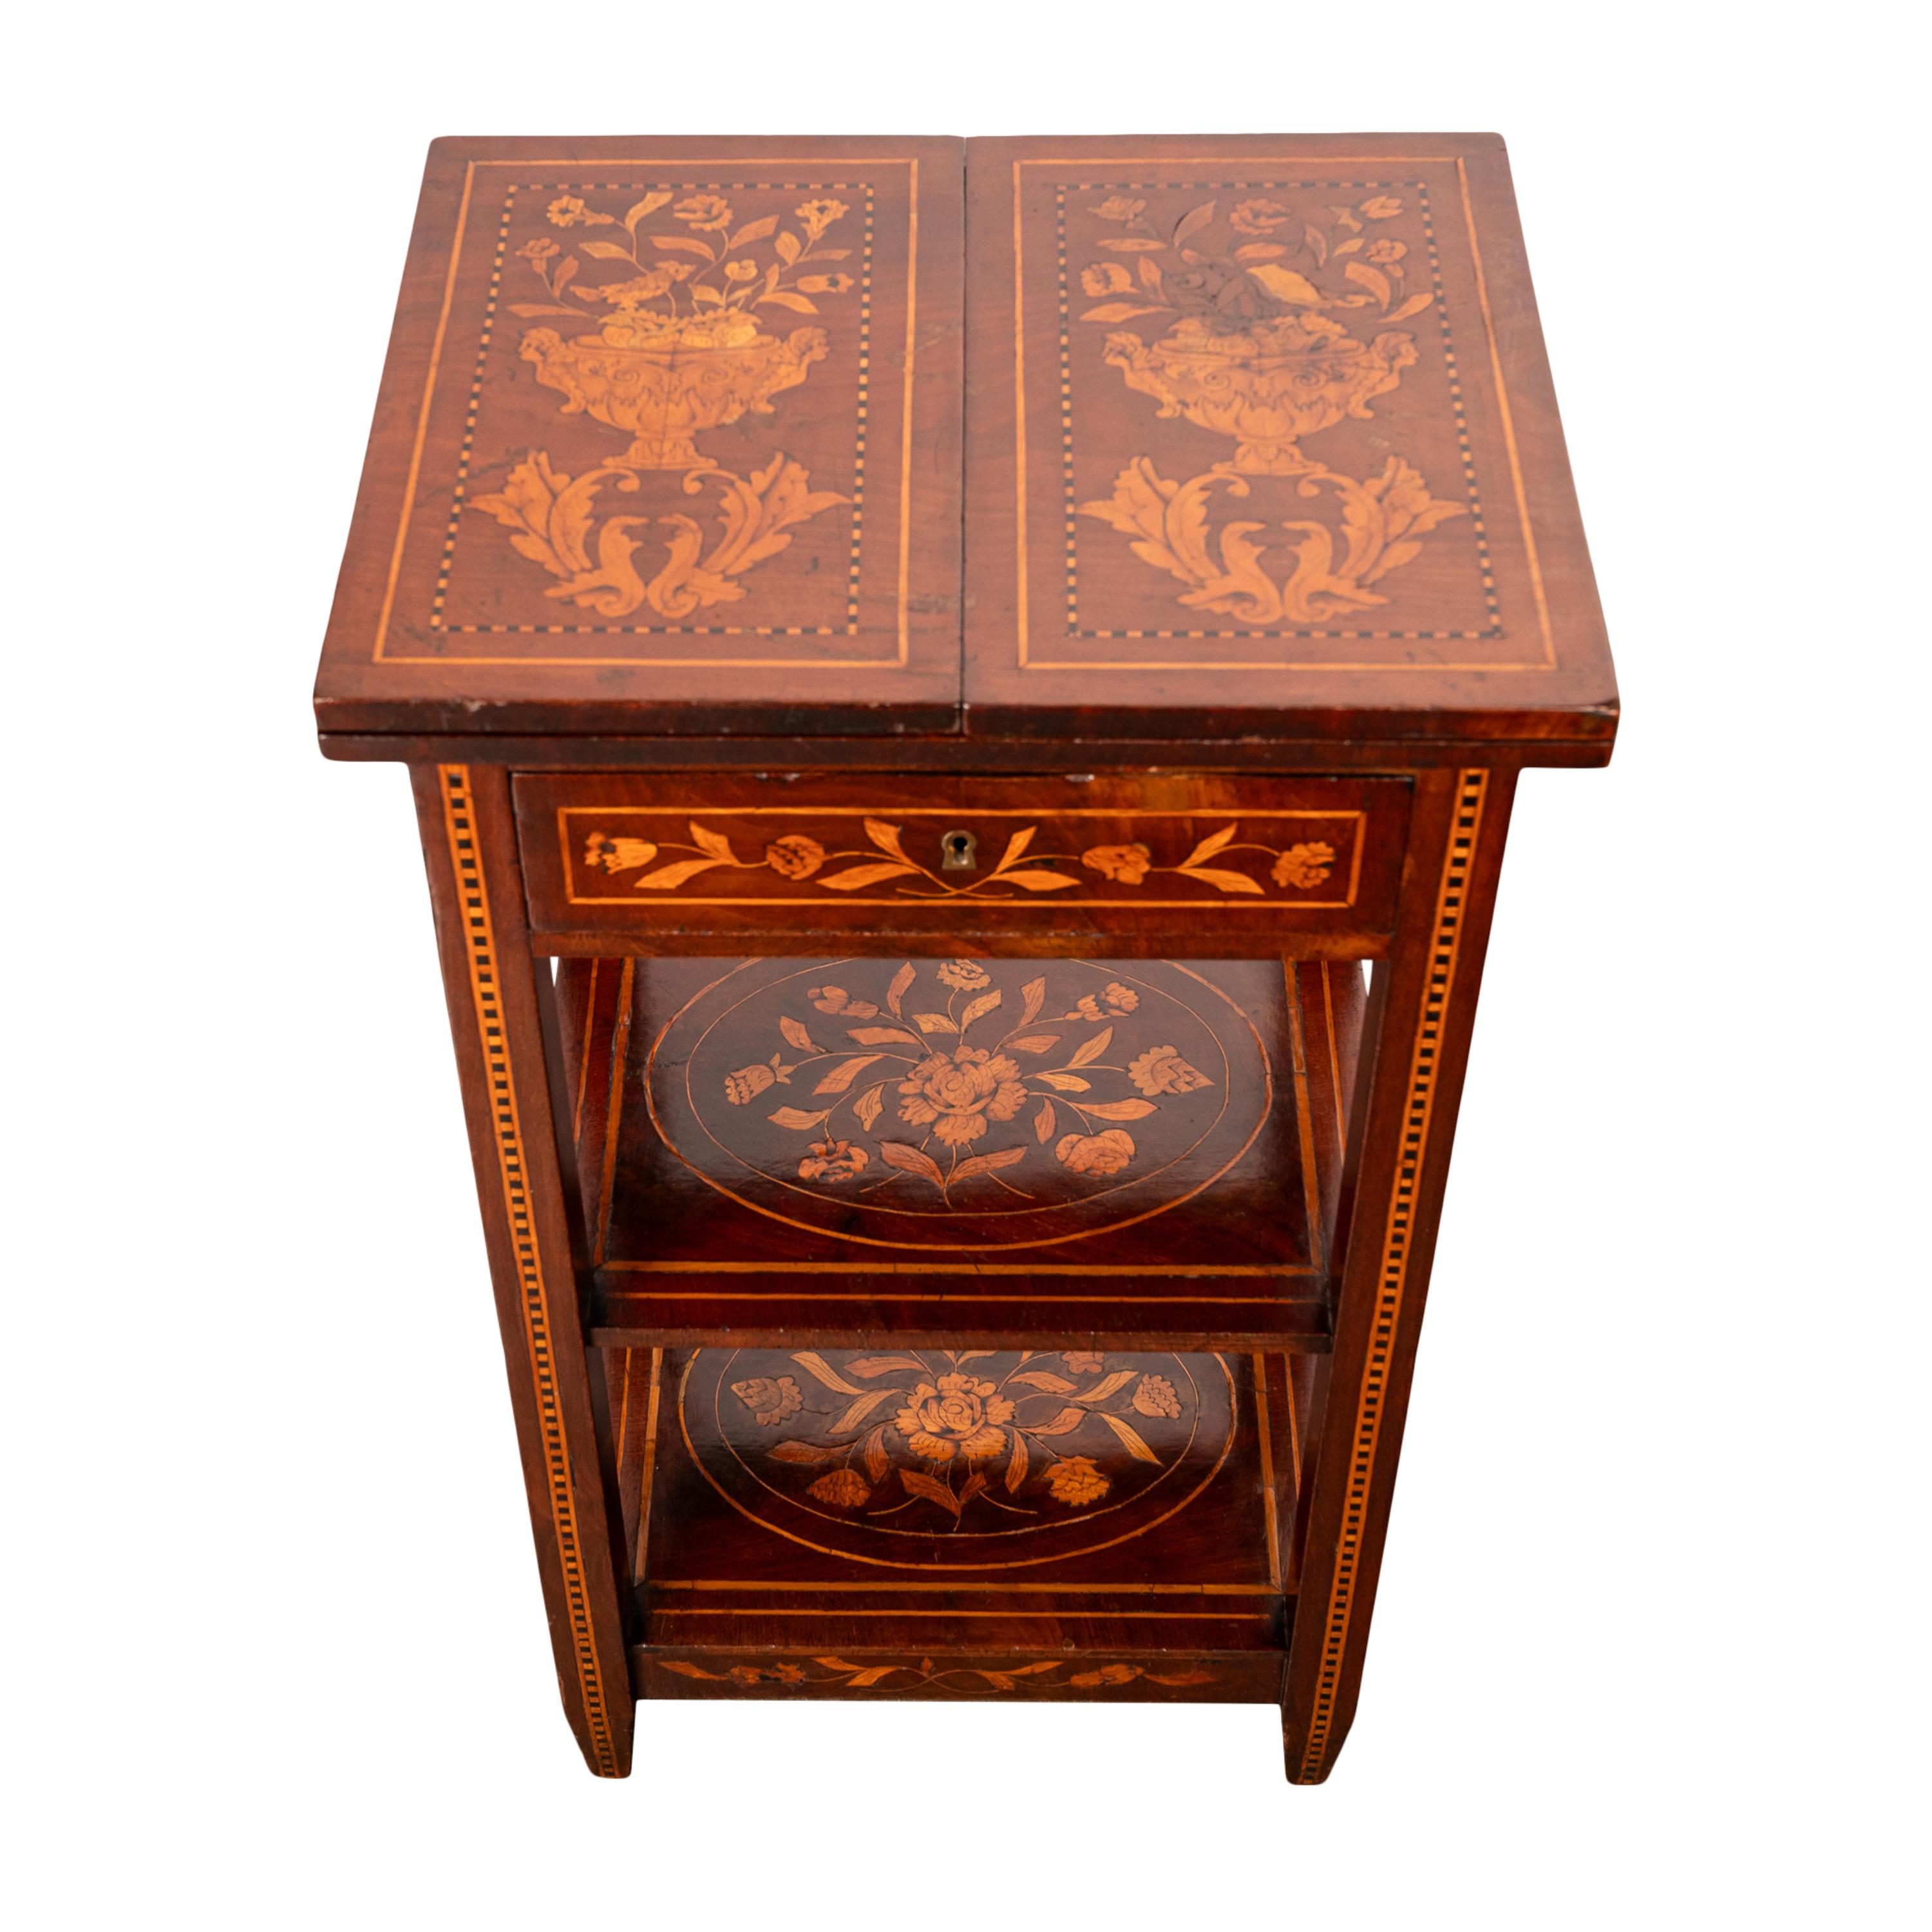 Regency Antique Dutch Georgian Marquetry Foldout Rosewood Satinwood Table Etagere 1820 For Sale